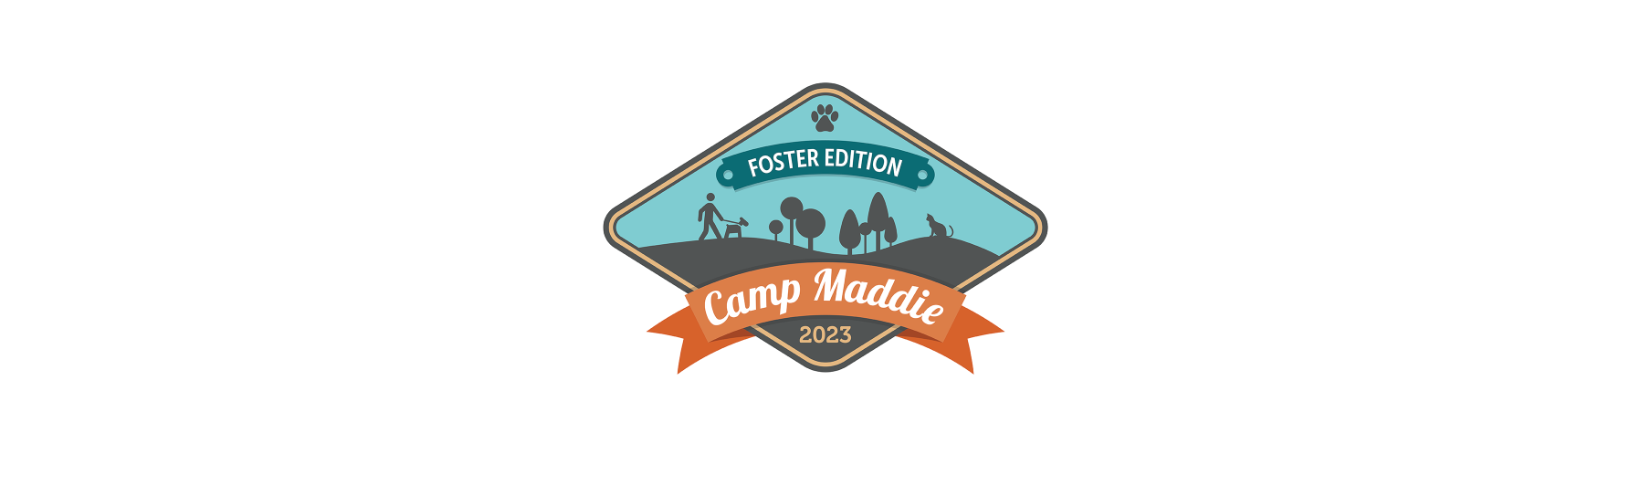 Camp Maddie: Foster Edition Package